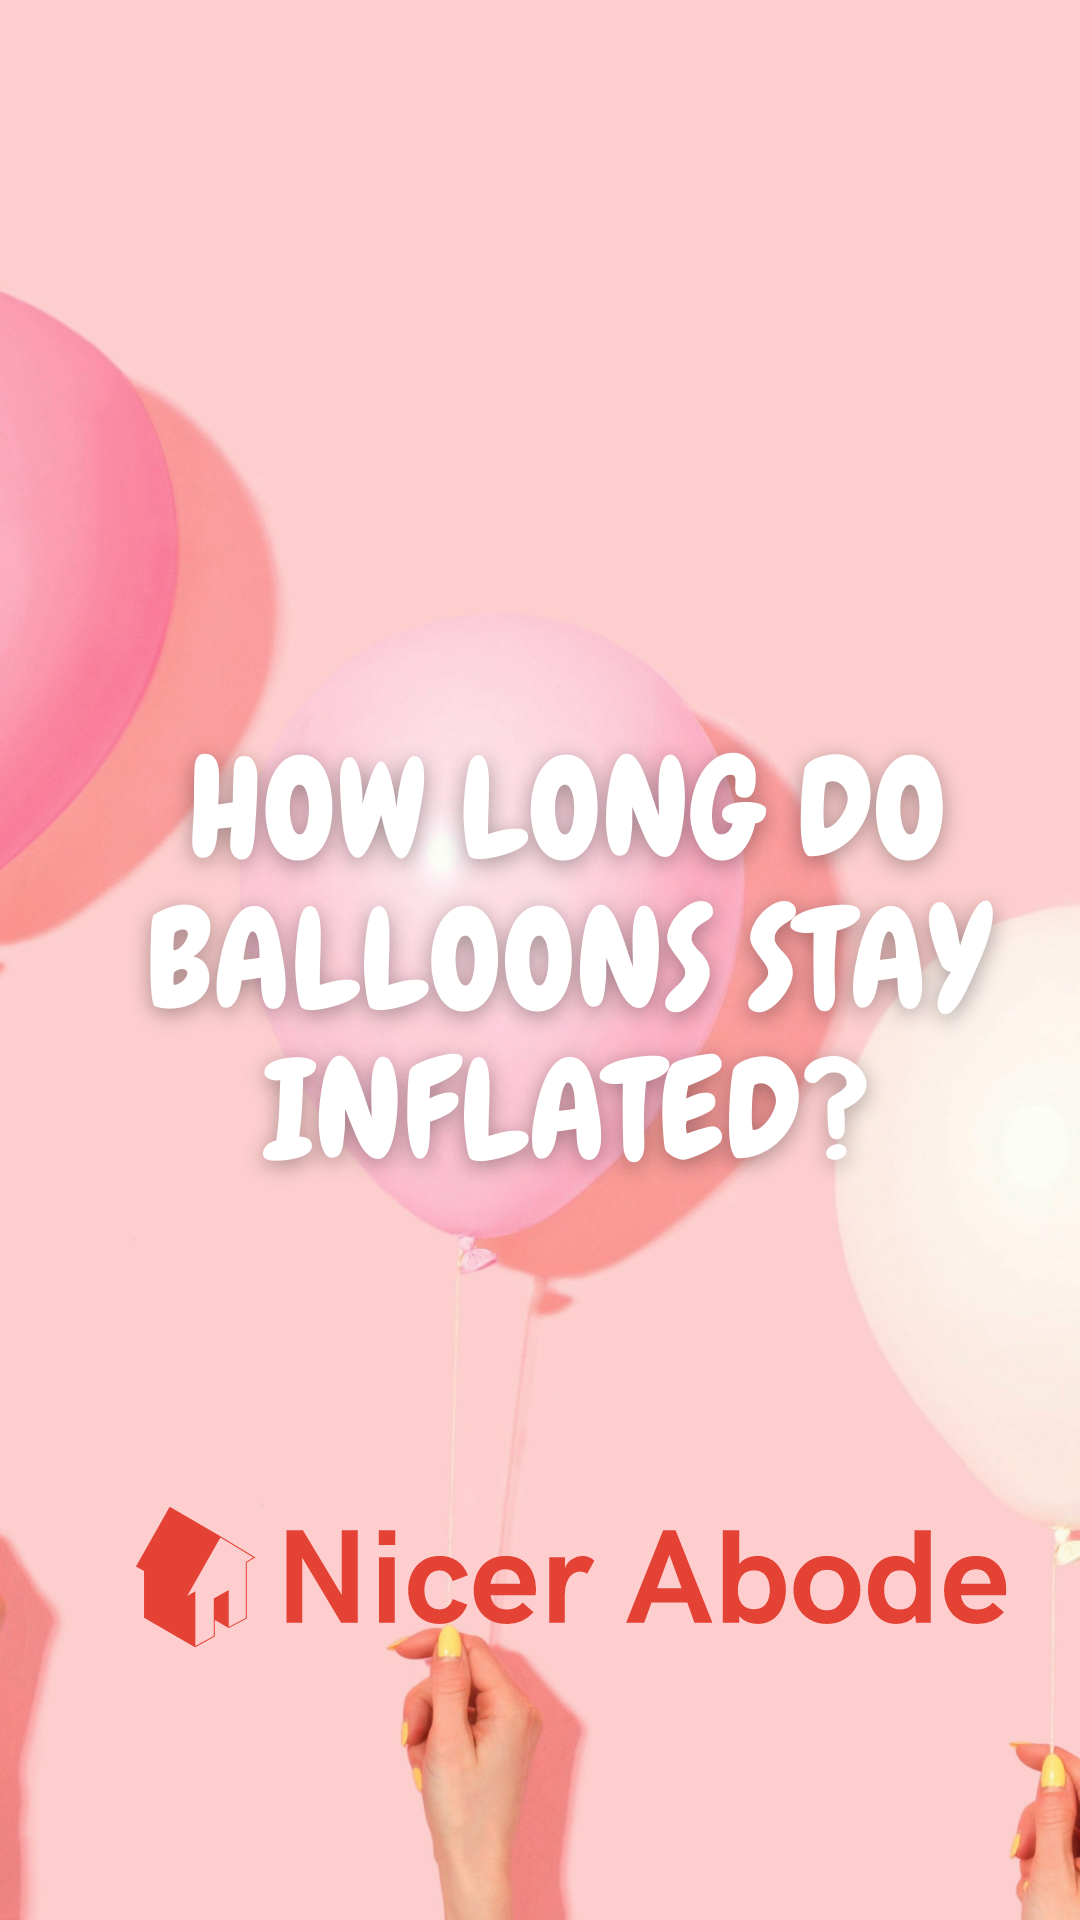 How-long-do-balloons-stay-inflated